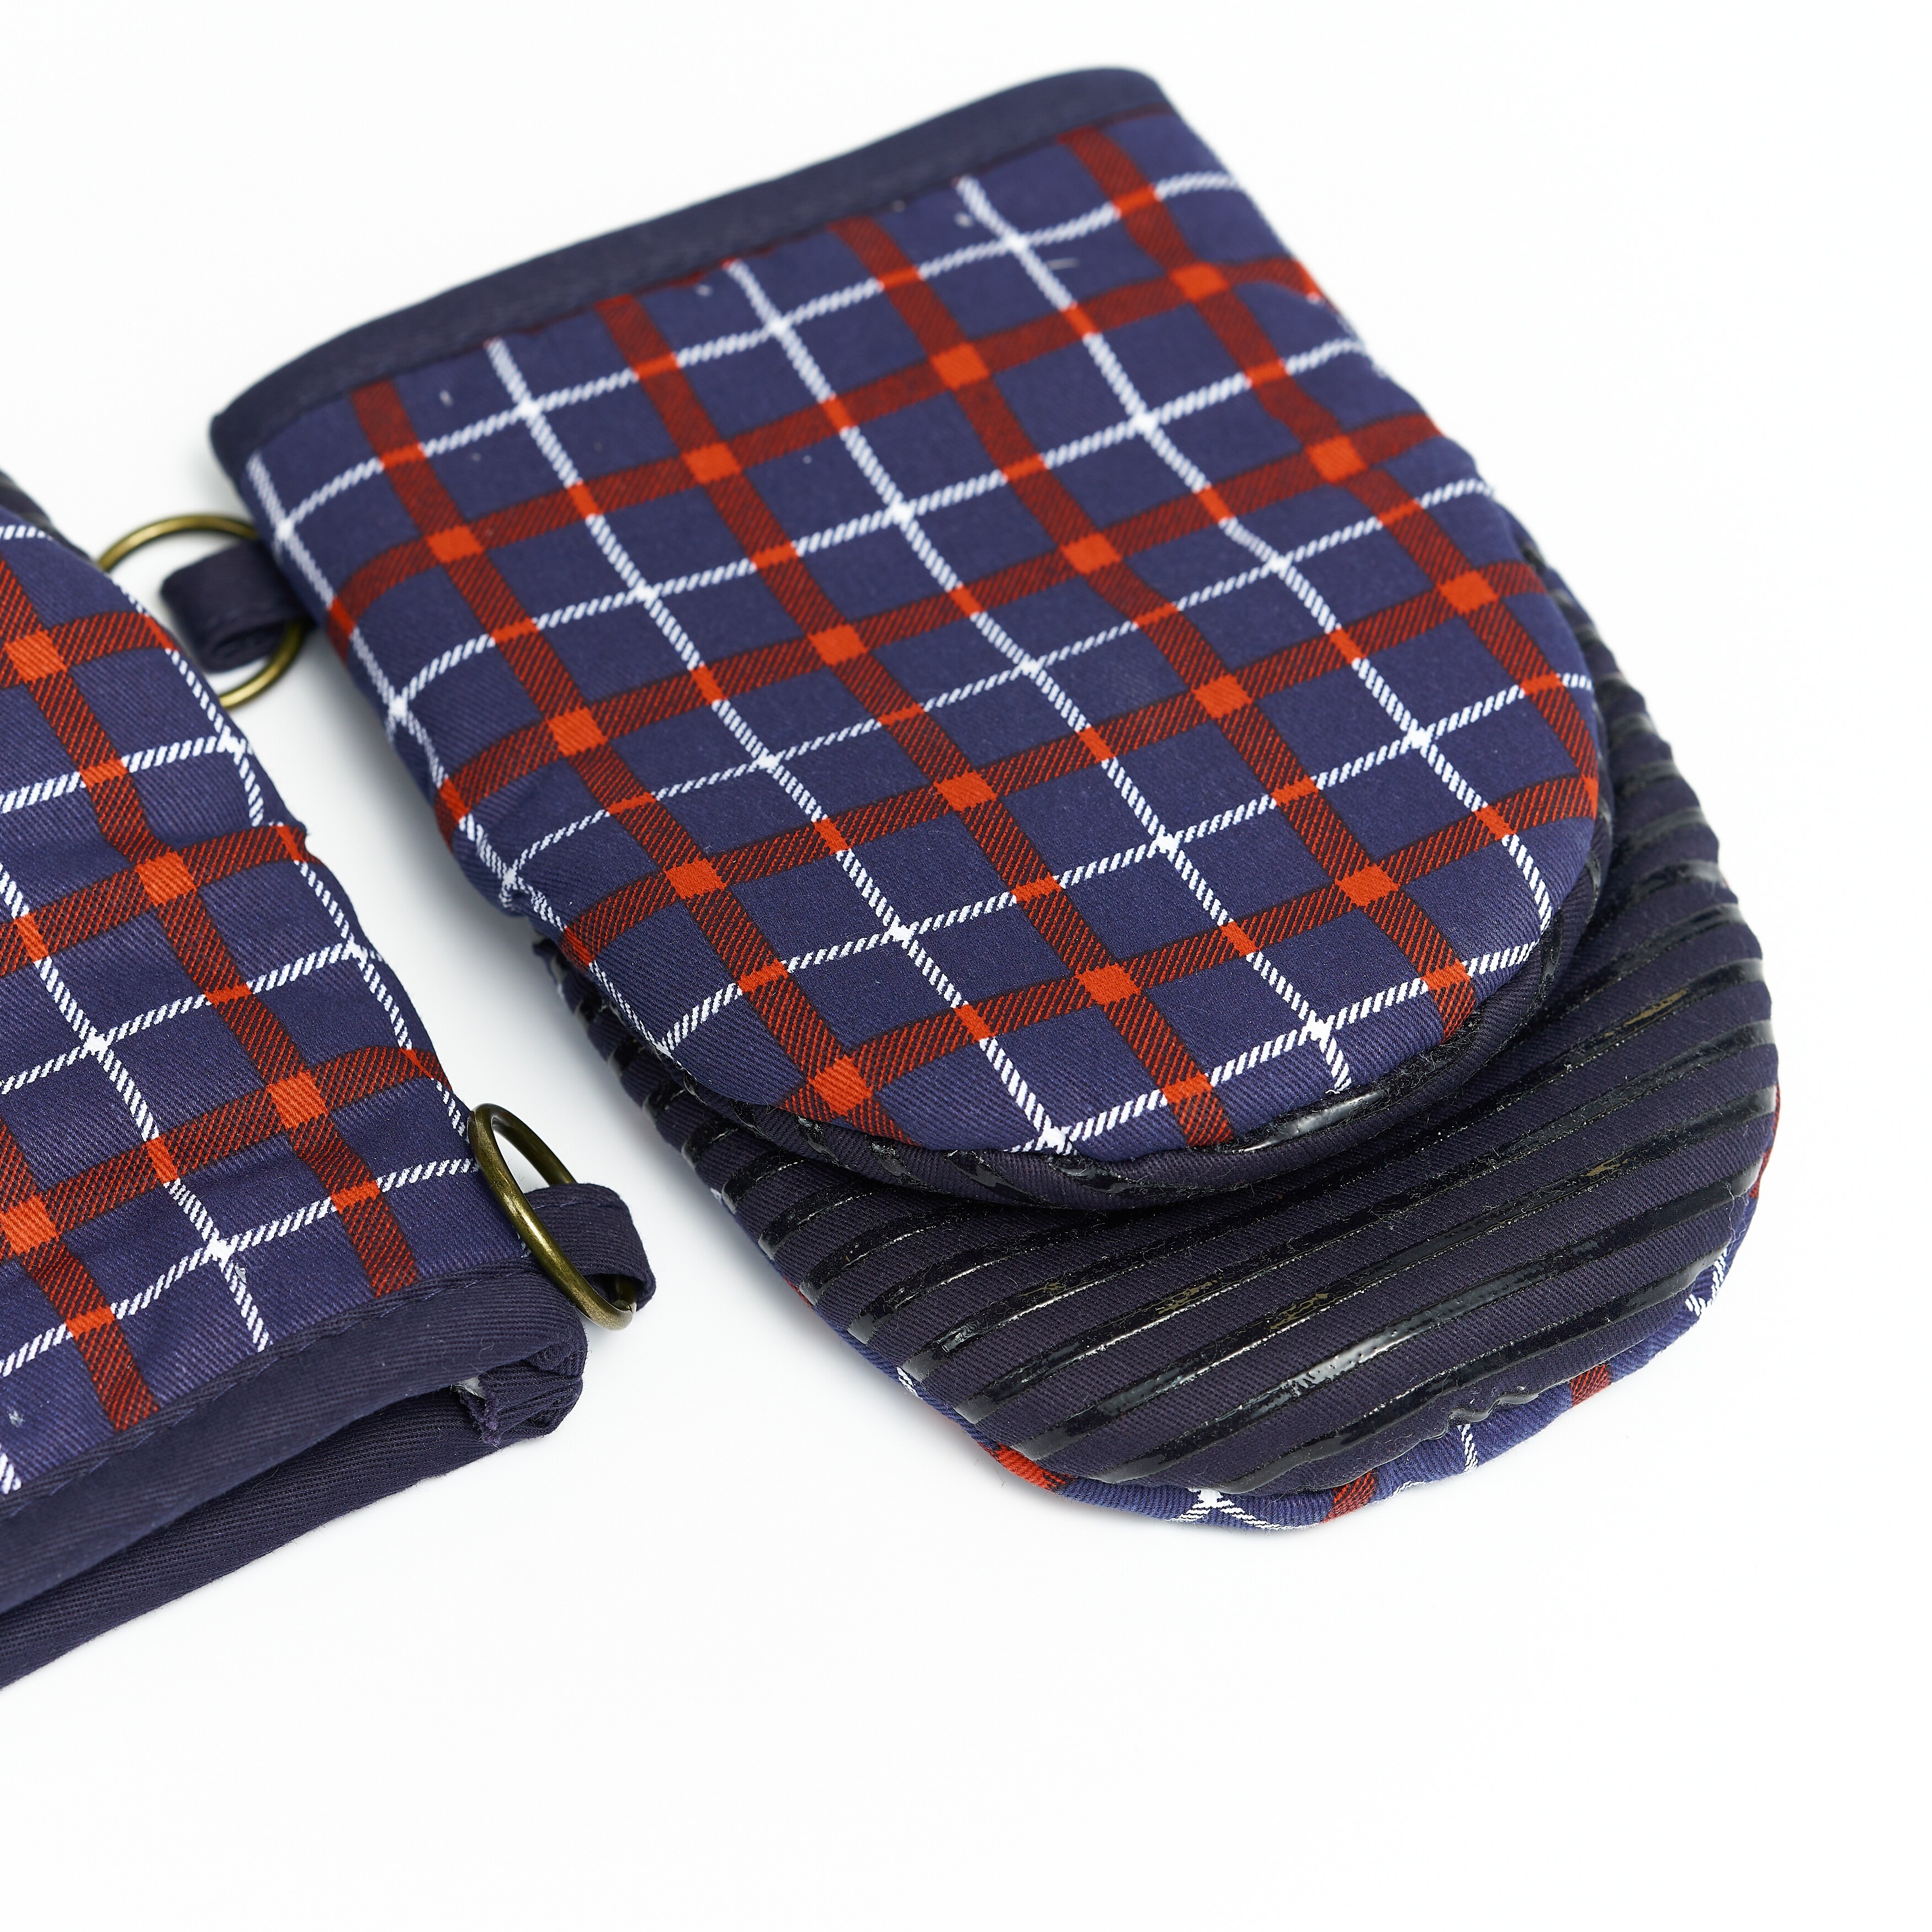 https://ak1.ostkcdn.com/images/products/is/images/direct/e0cfb570b7b20e80a19ee49d896a0ff0e9a2131e/Nautica-Home-Plaid-Red-Navy-100%25-Cotton-Mini-Oven-Mitt-With-Silicone-Palm-%28Set-of-2%29.jpg